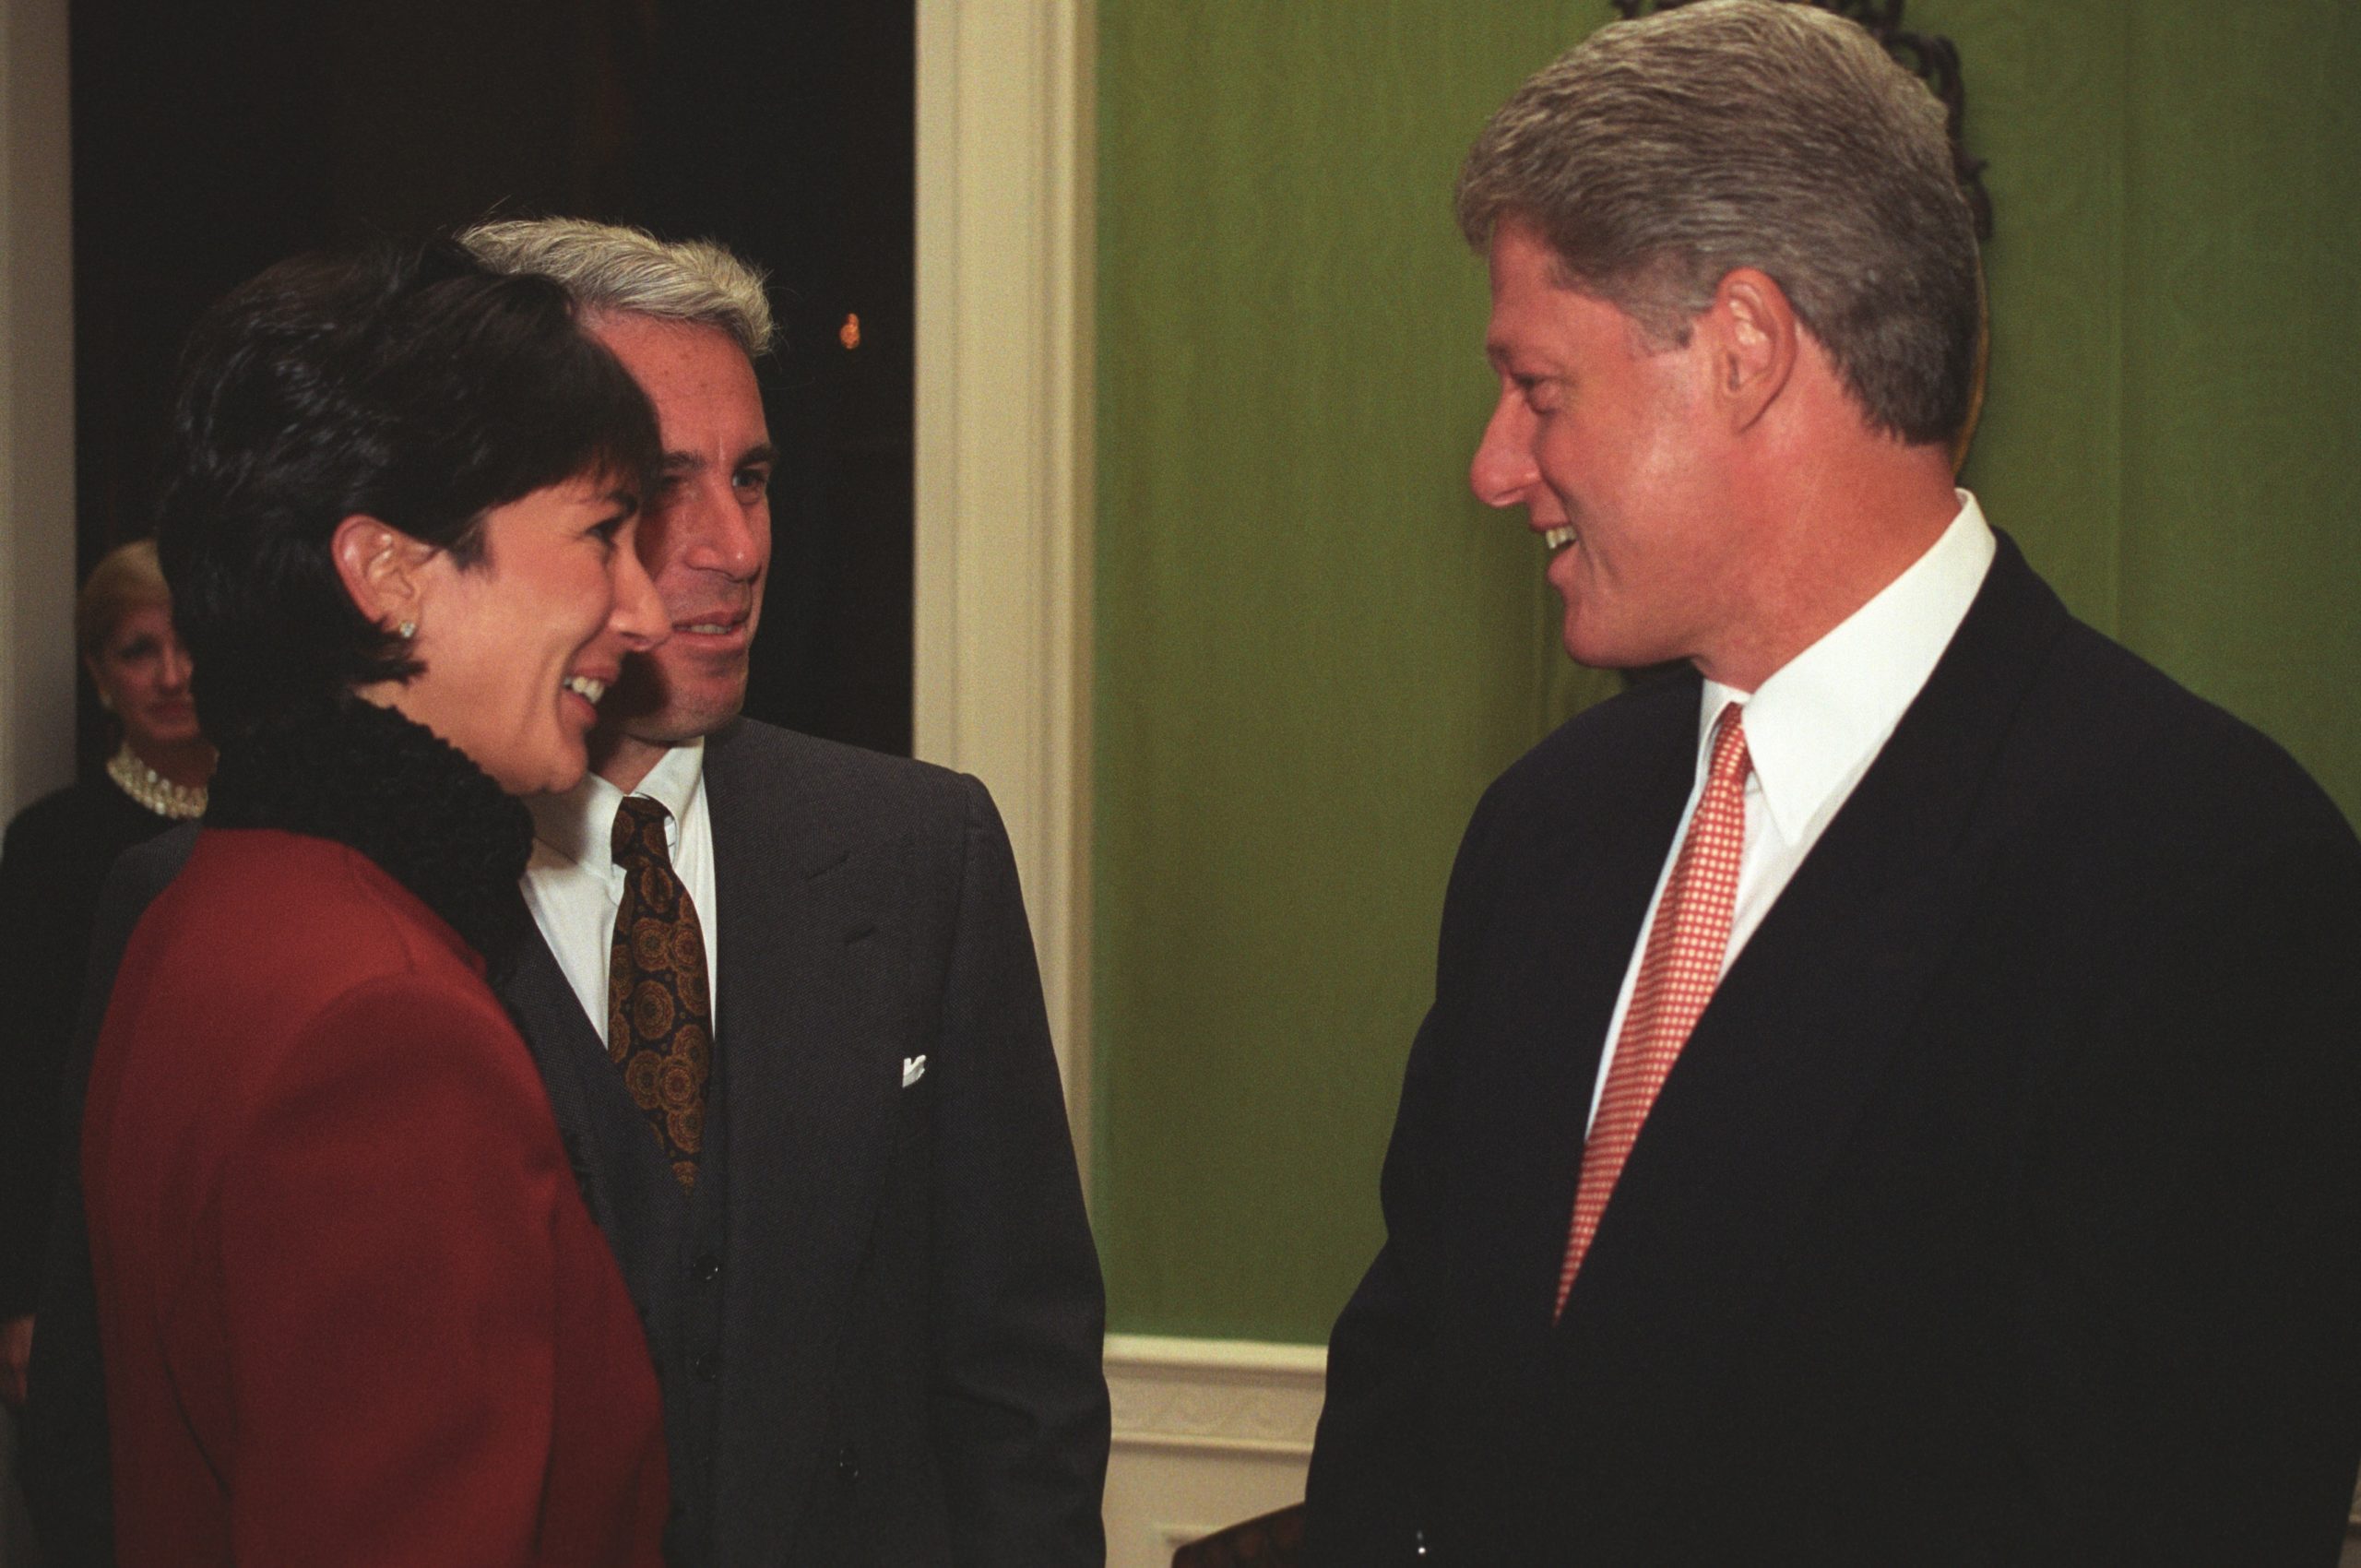 Photo courtesy of the William J. Clinton Presidential Library.